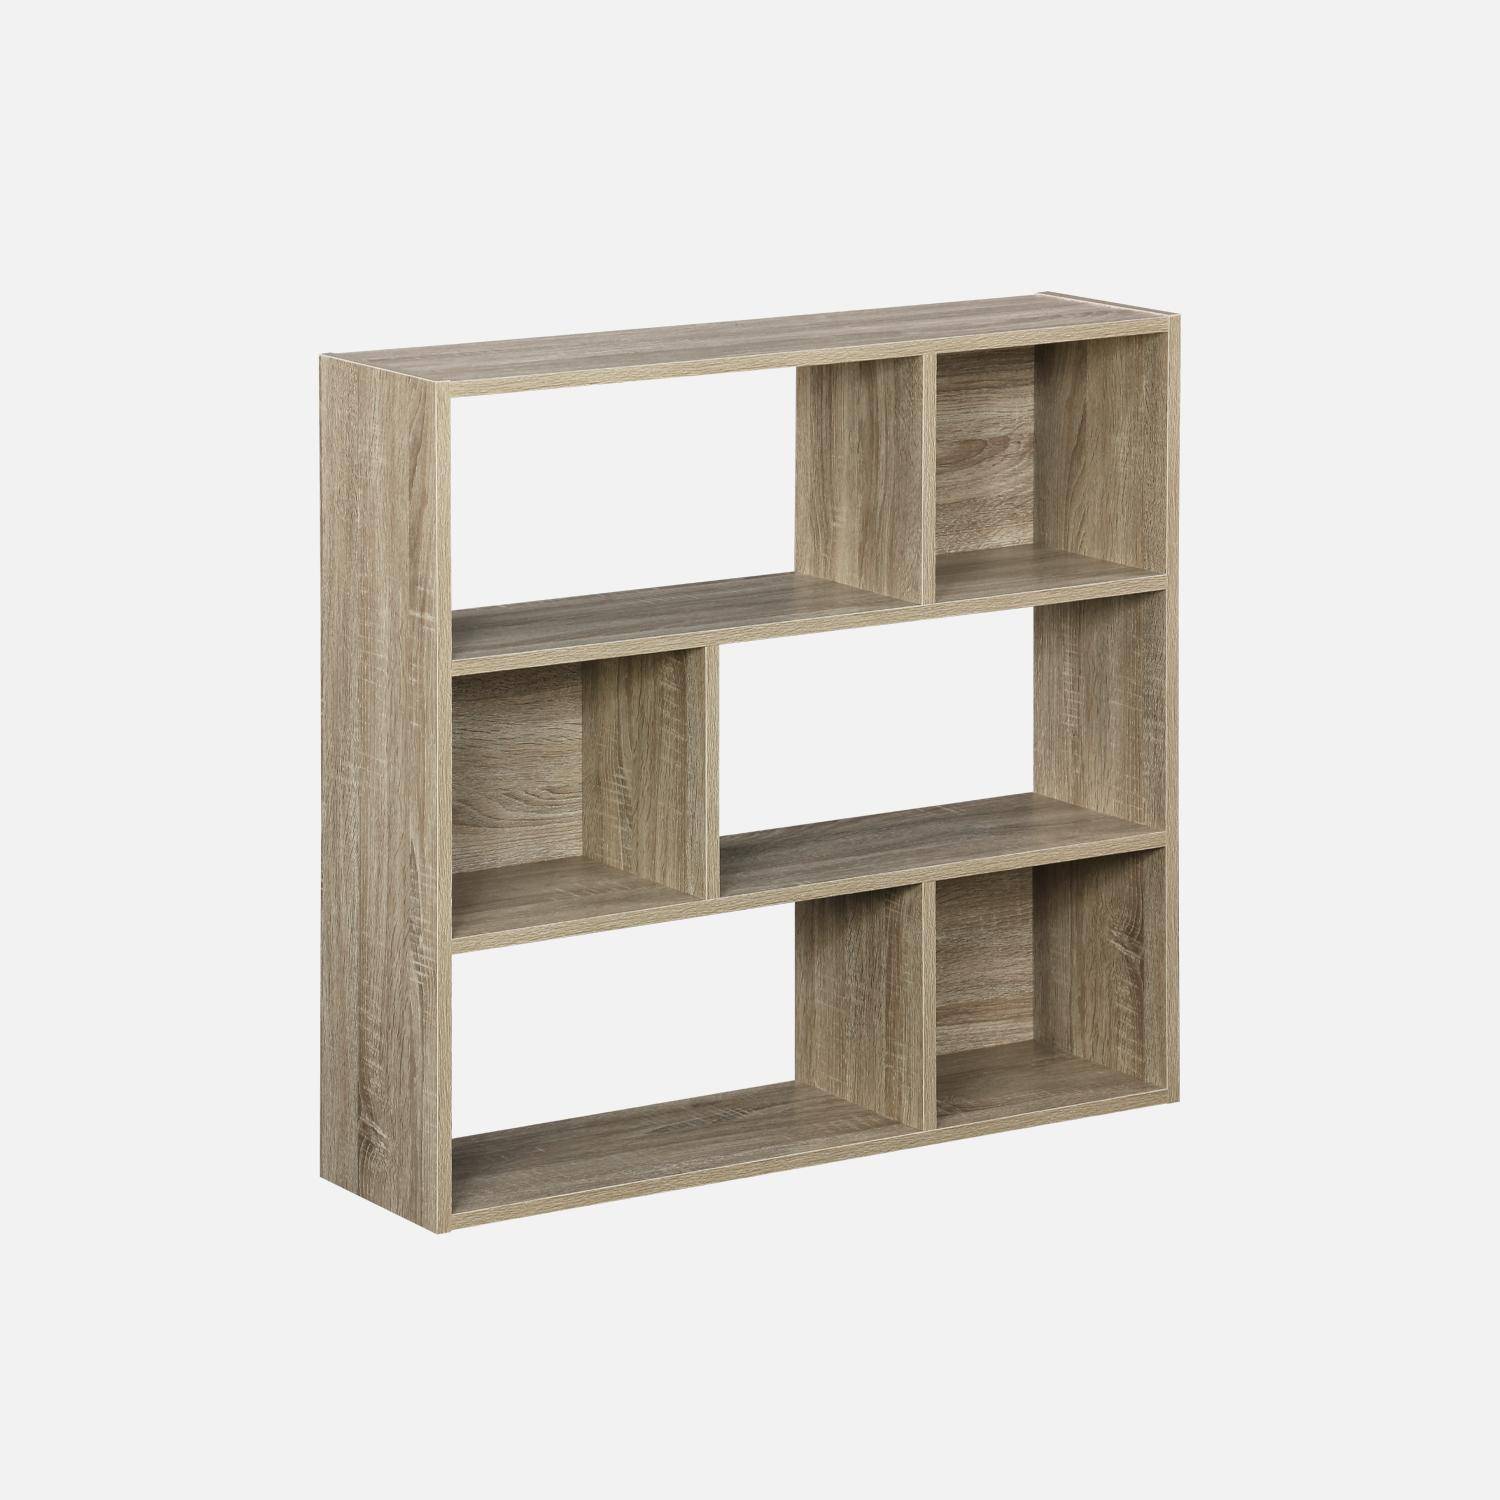 3-shelf bookcase with 6 storage compartments, L83xW23xH80cm, natural, Pieter Photo3